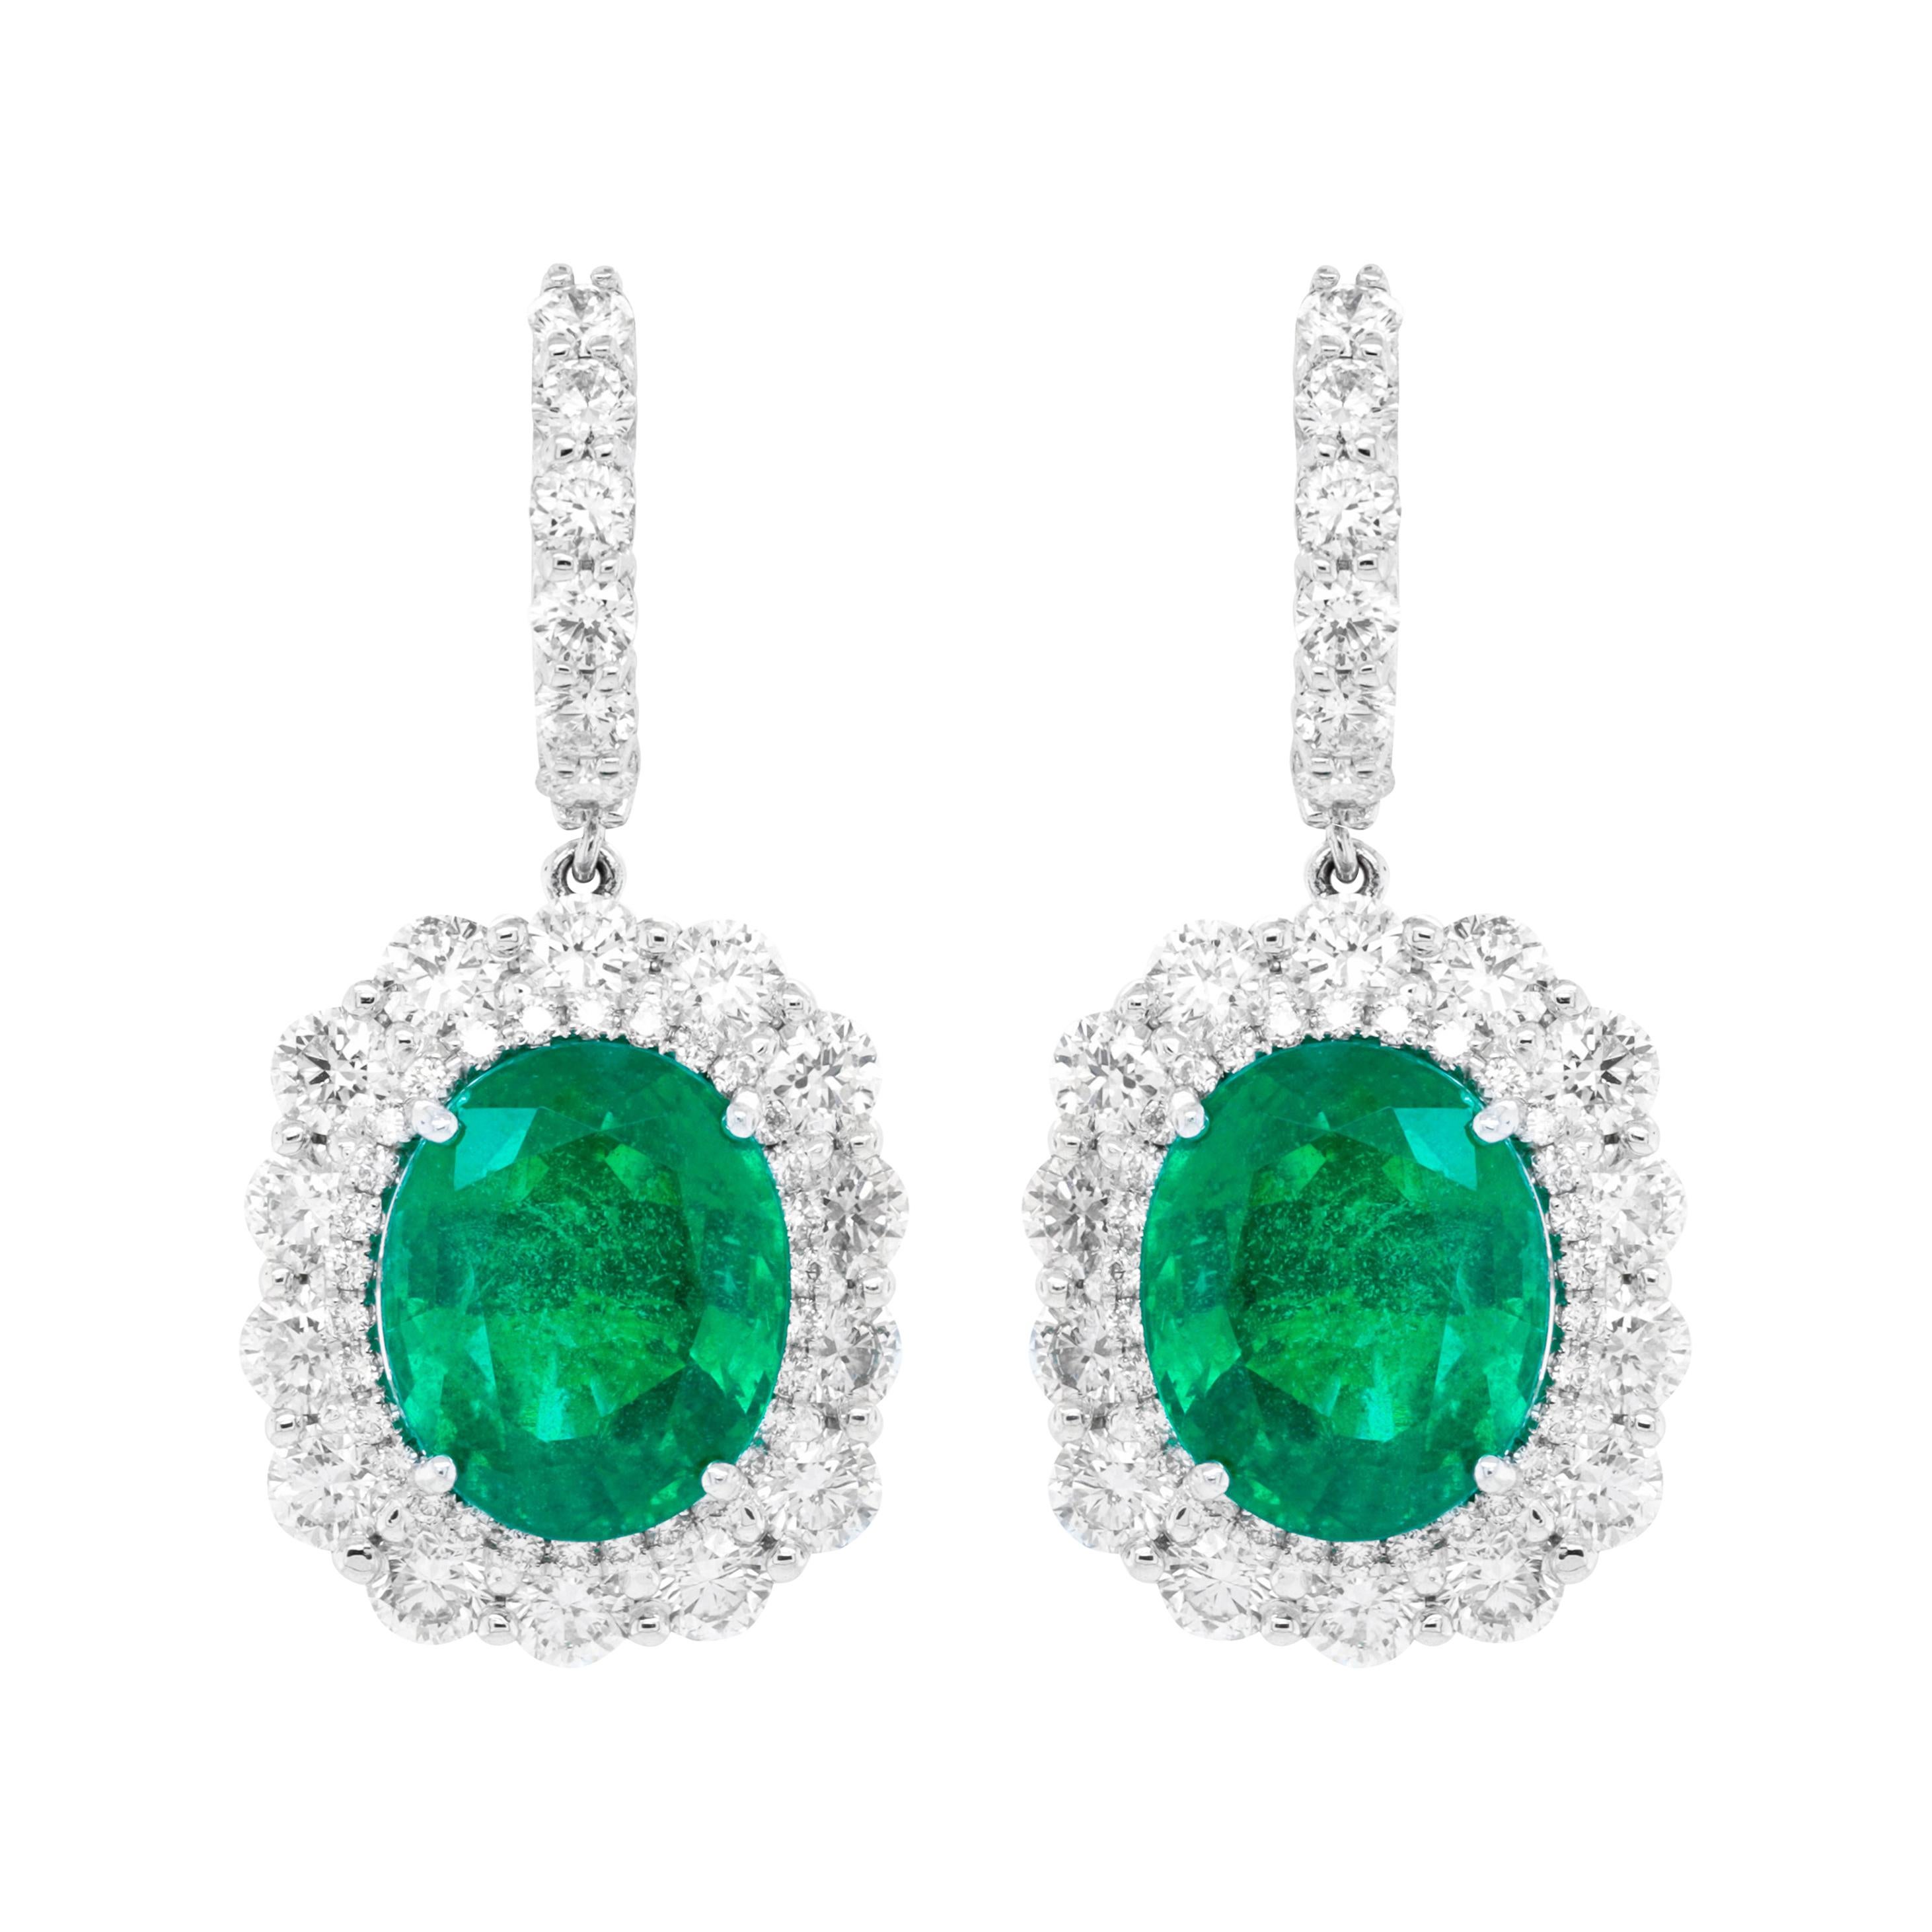 Diana M. 18KT White Gold Earrings with Oval Green Emerald & Round White Diamond For Sale